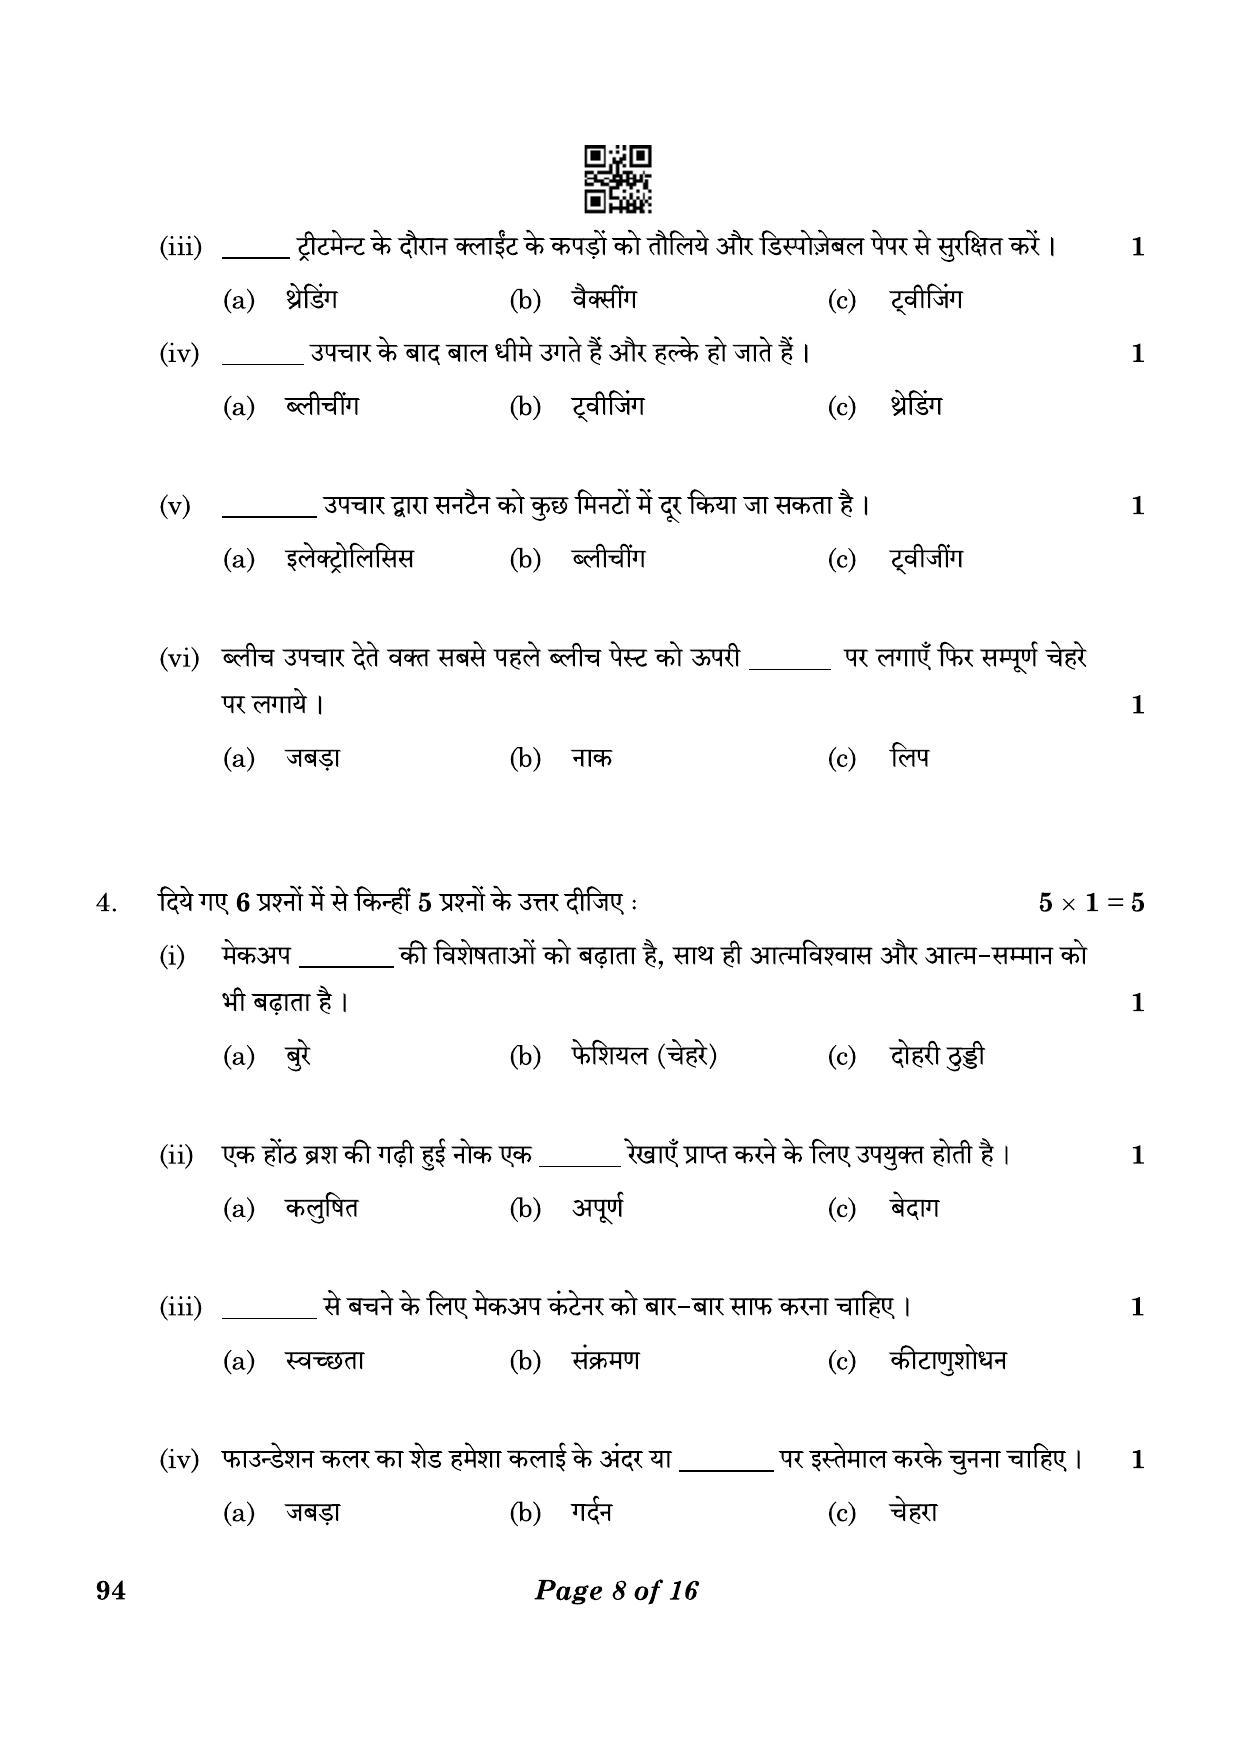 CBSE Class 10 94 Beauty And Wellness 2023 Question Paper - Page 8